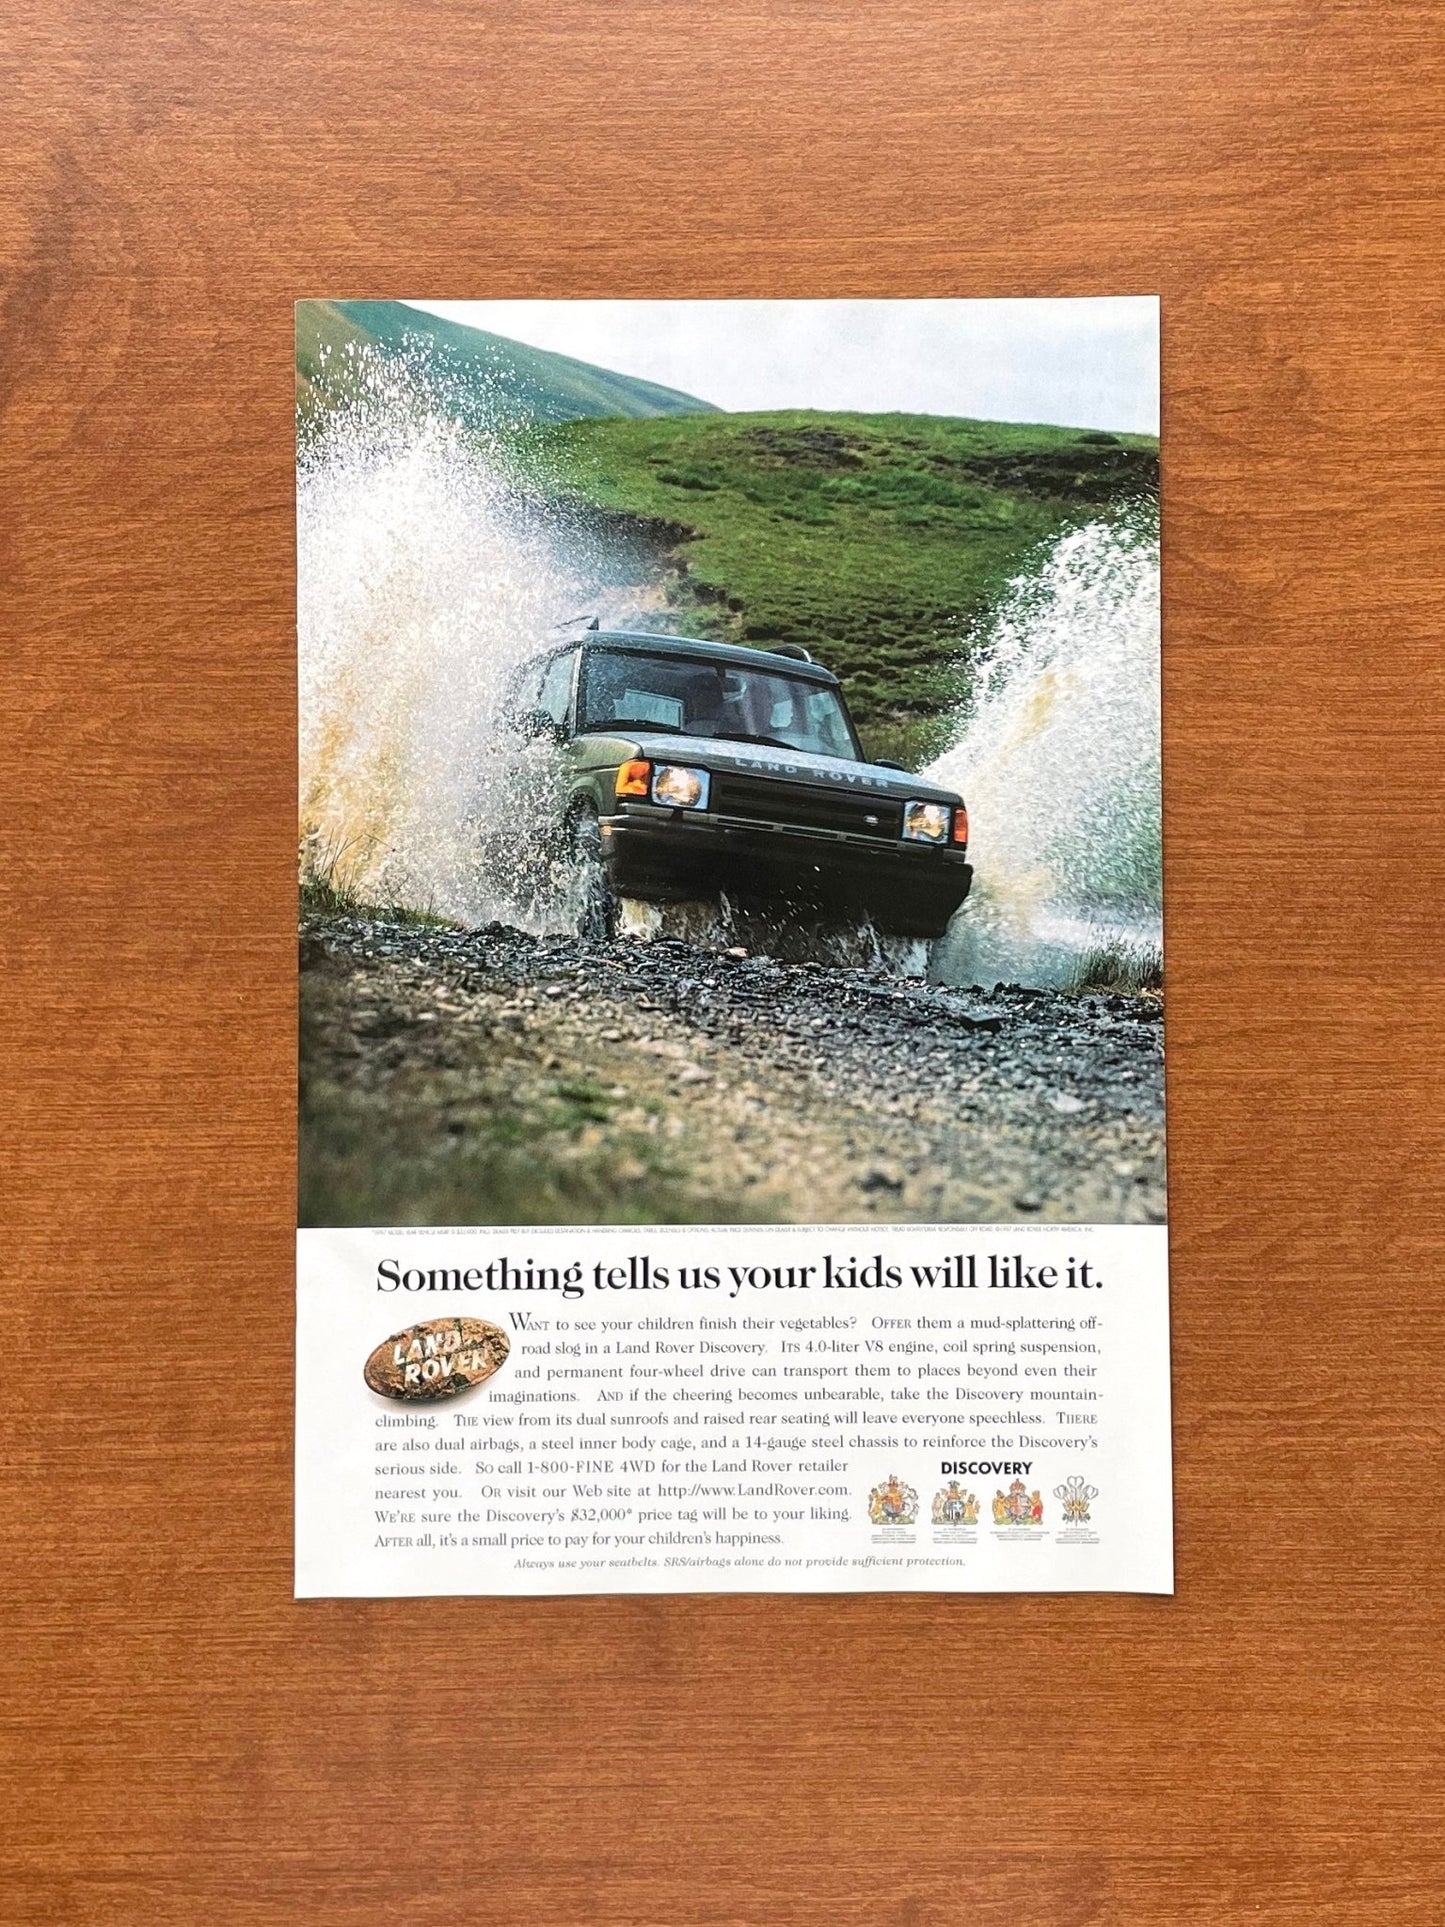 1997 Discovery "your kids will like it." Advertisement